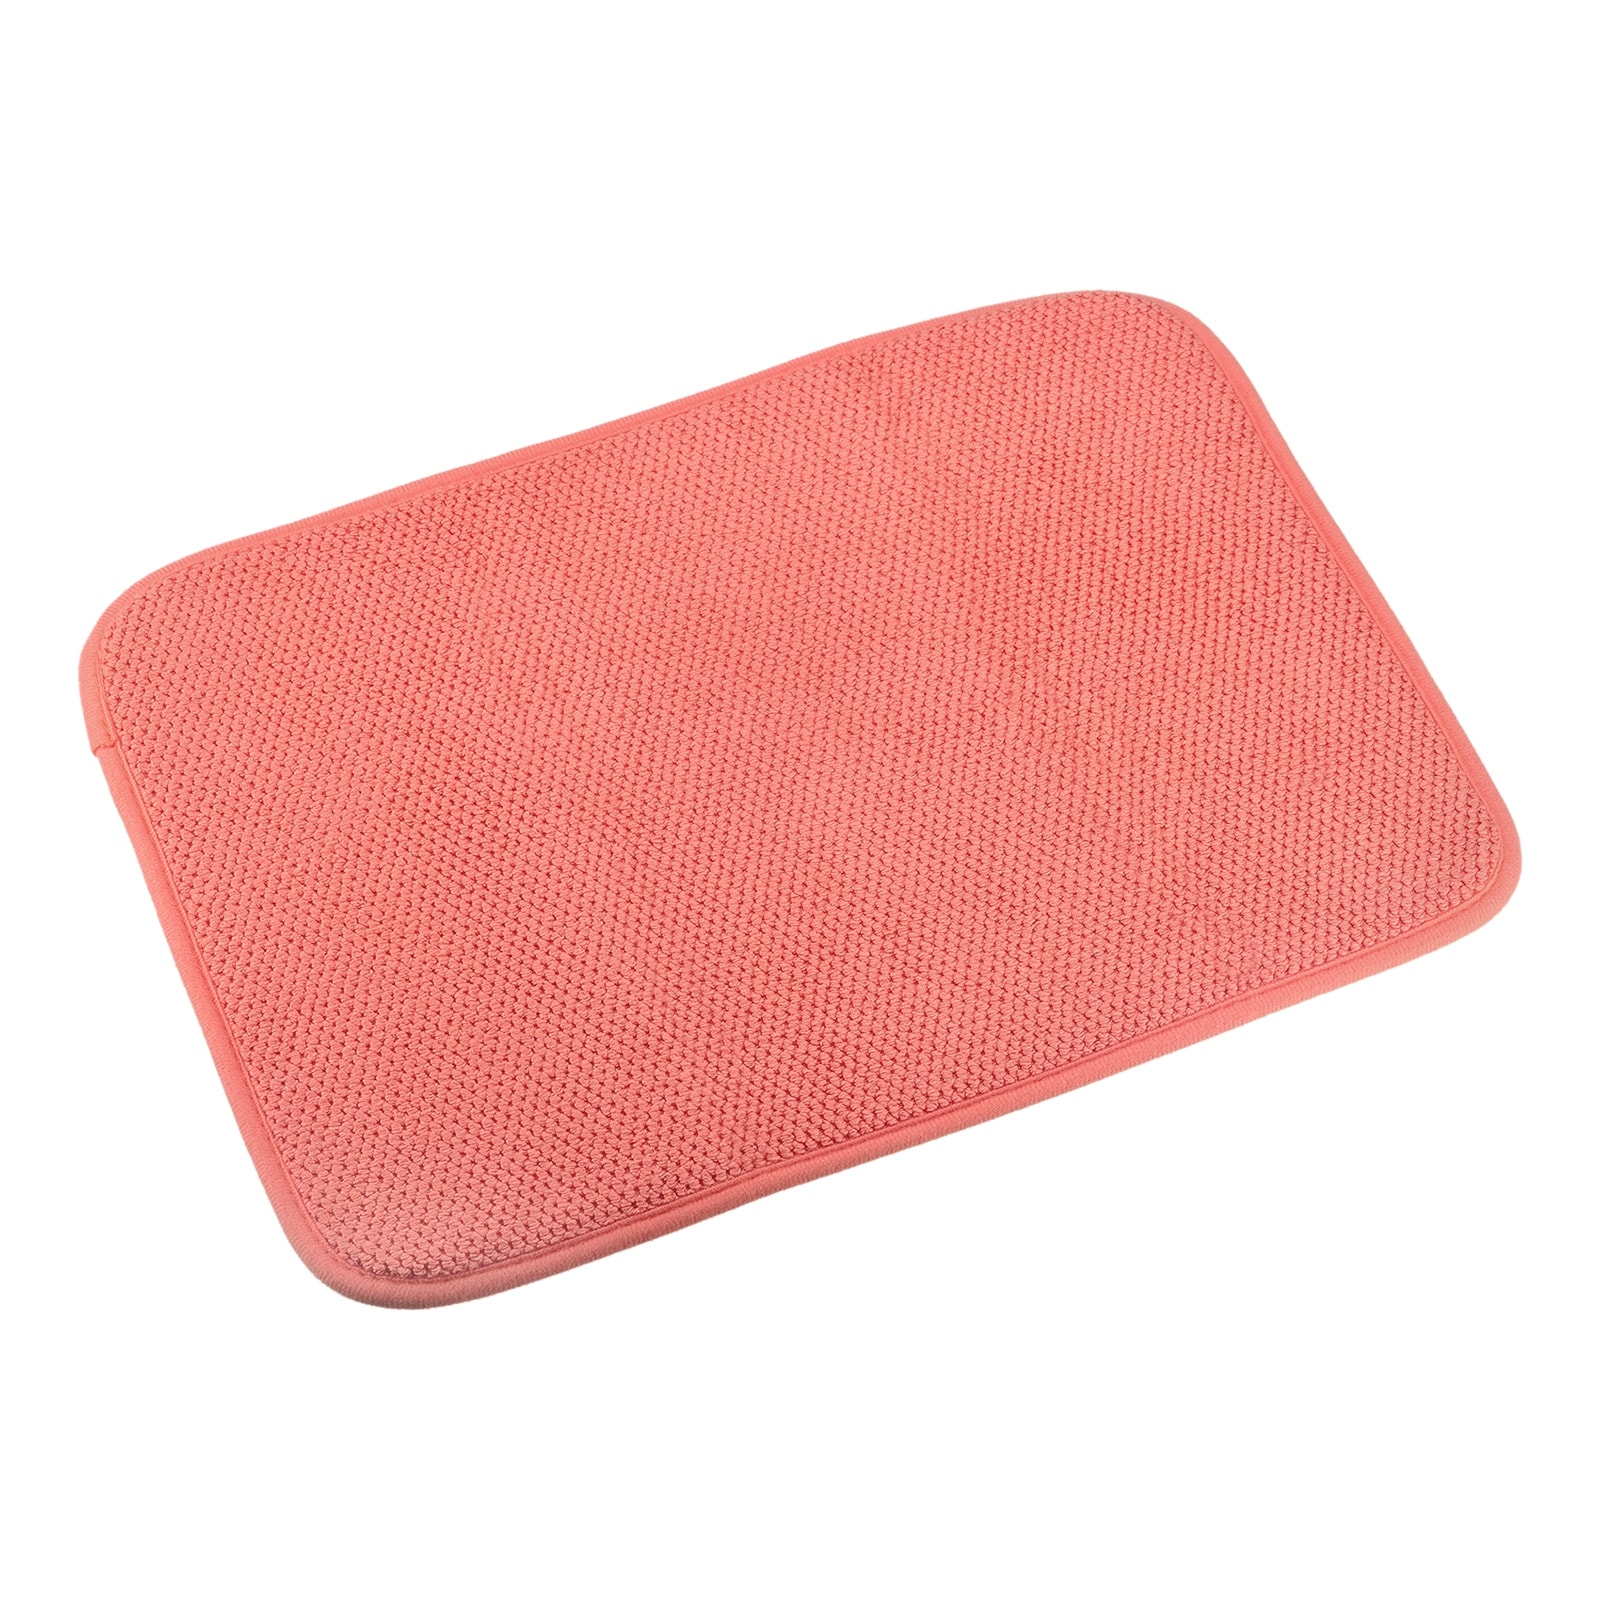 https://ak1.ostkcdn.com/images/products/is/images/direct/eefc9faedf36ec95d75233fdca5304bce0e014a0/Microfiber-Dish-Drying-Mat%2C-15.75%22-x-11.82%22-Dishes-Drainer-Mats-Red.jpg